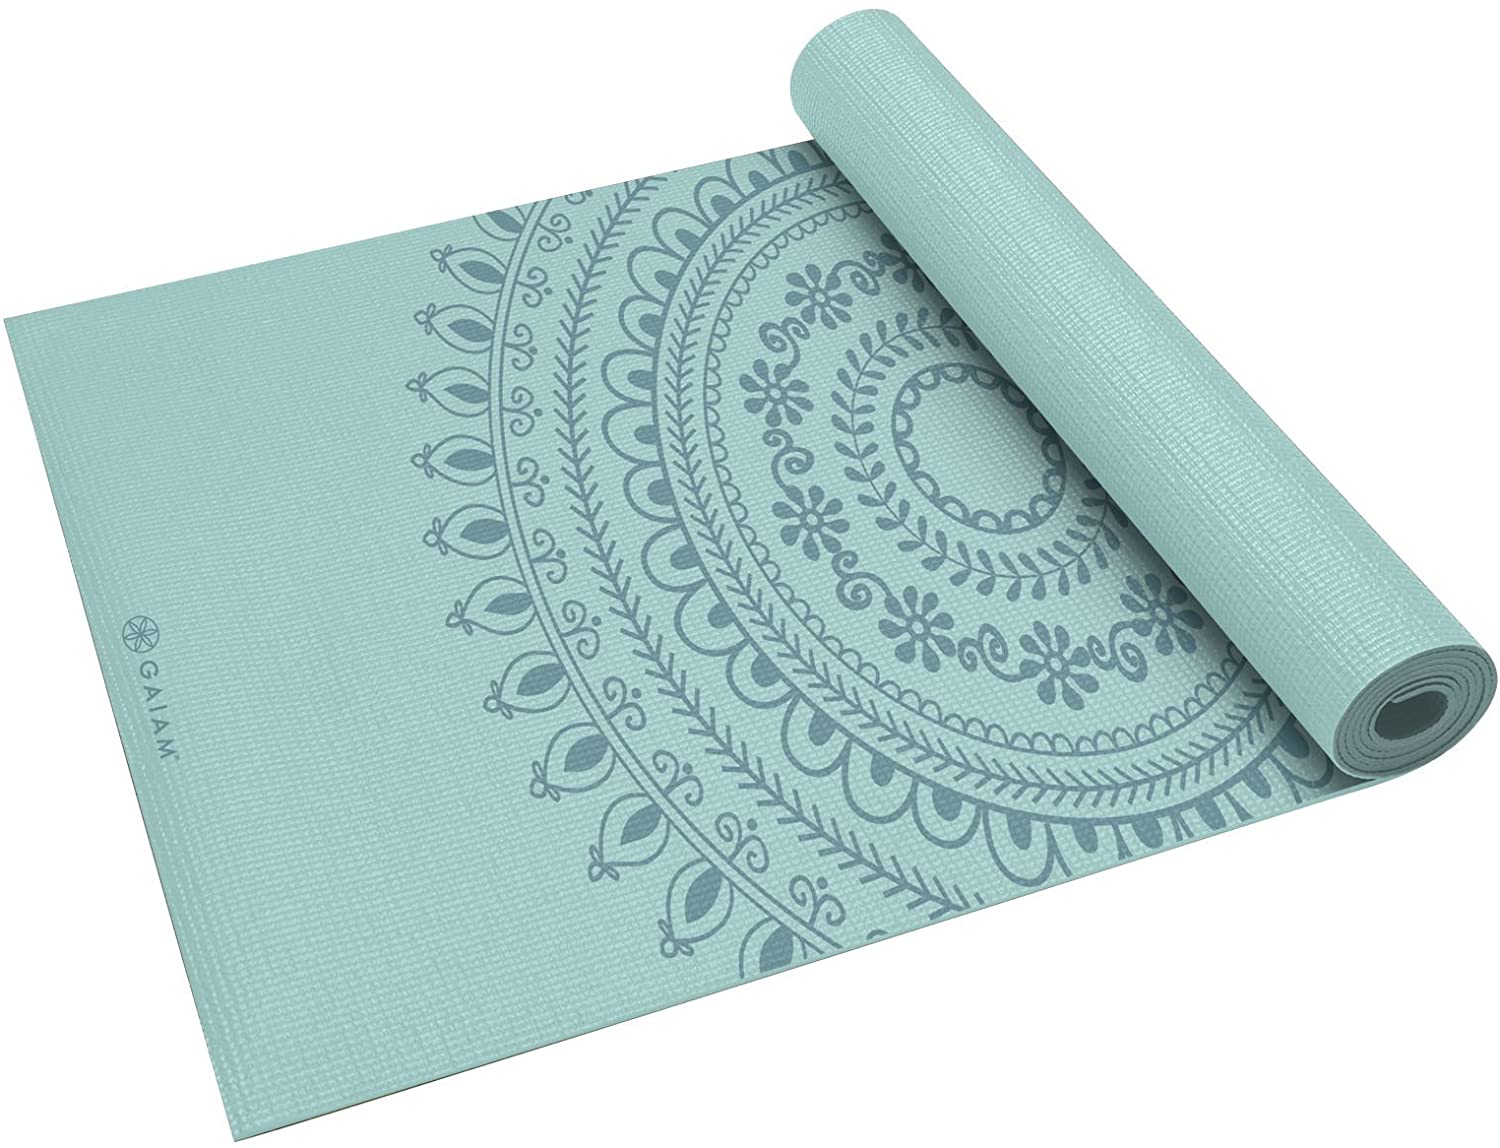 Gaiam Yoga Mat - 6mm Insta-Grip Extra Thick & Dense Textured Non Slip  Exercise Mat for All Types of Yoga & Floor Workouts, 68 L x 24 W x 6mm  Thick, Cove